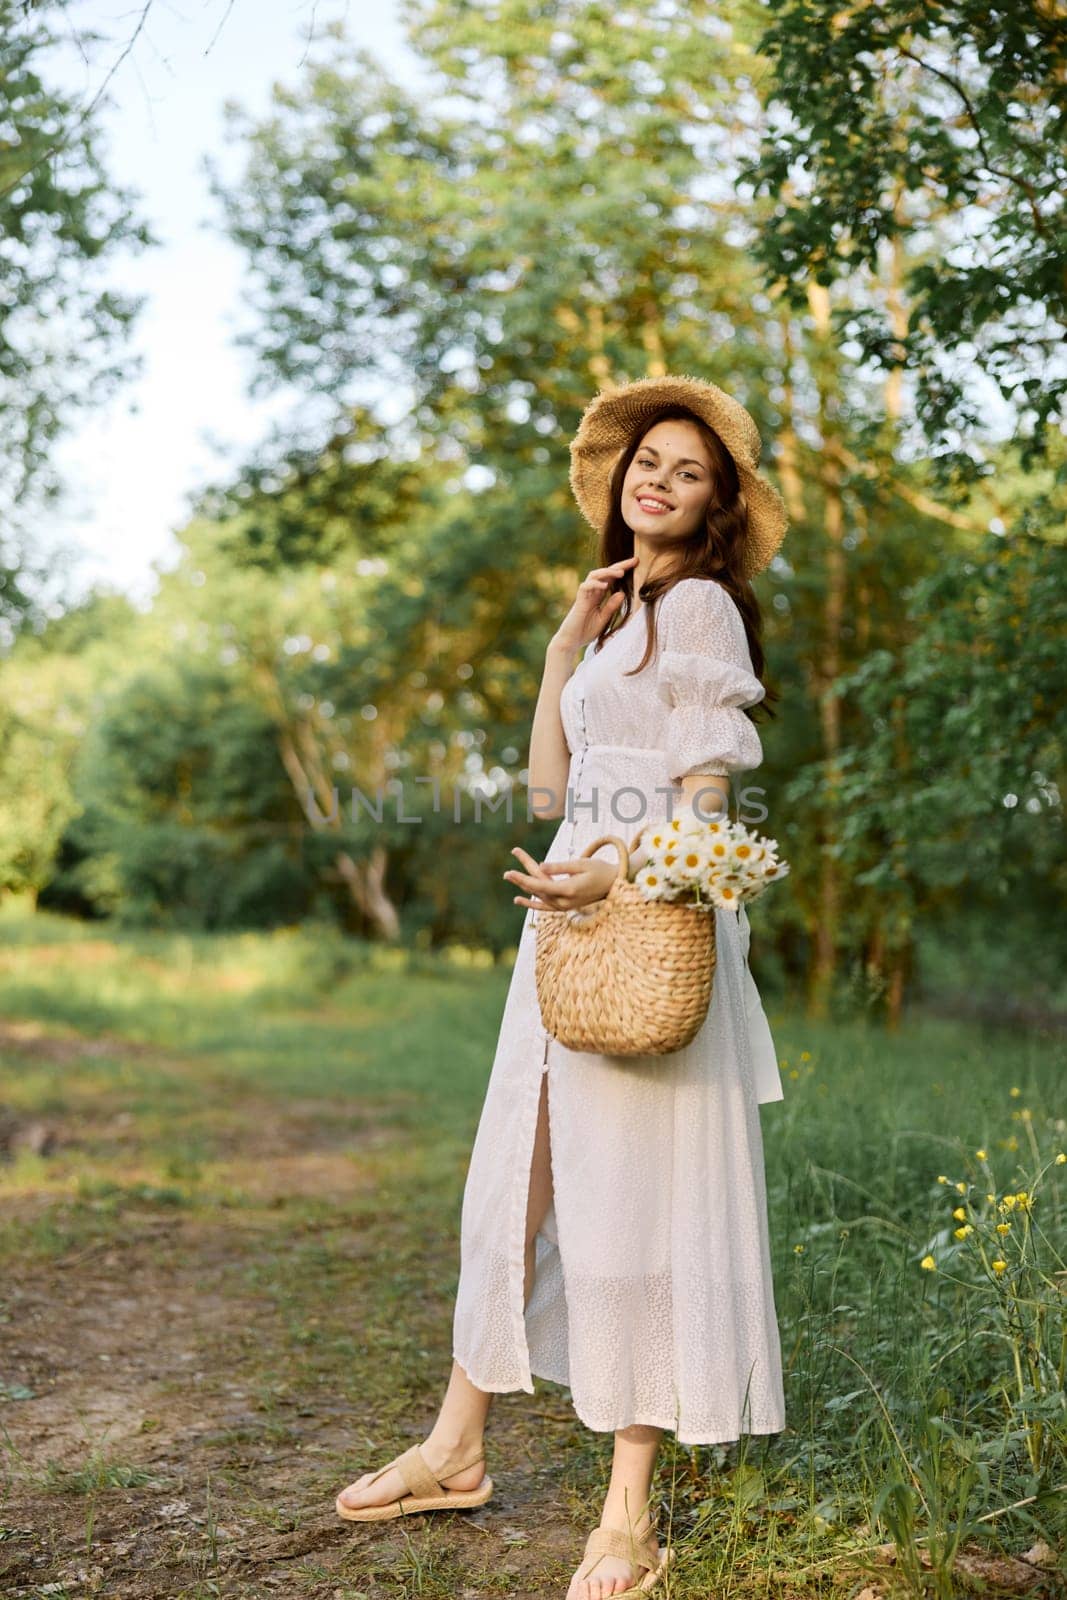 a woman in a light summer dress and a wicker hat stands in the forest with a basket of daisies in her hands by Vichizh